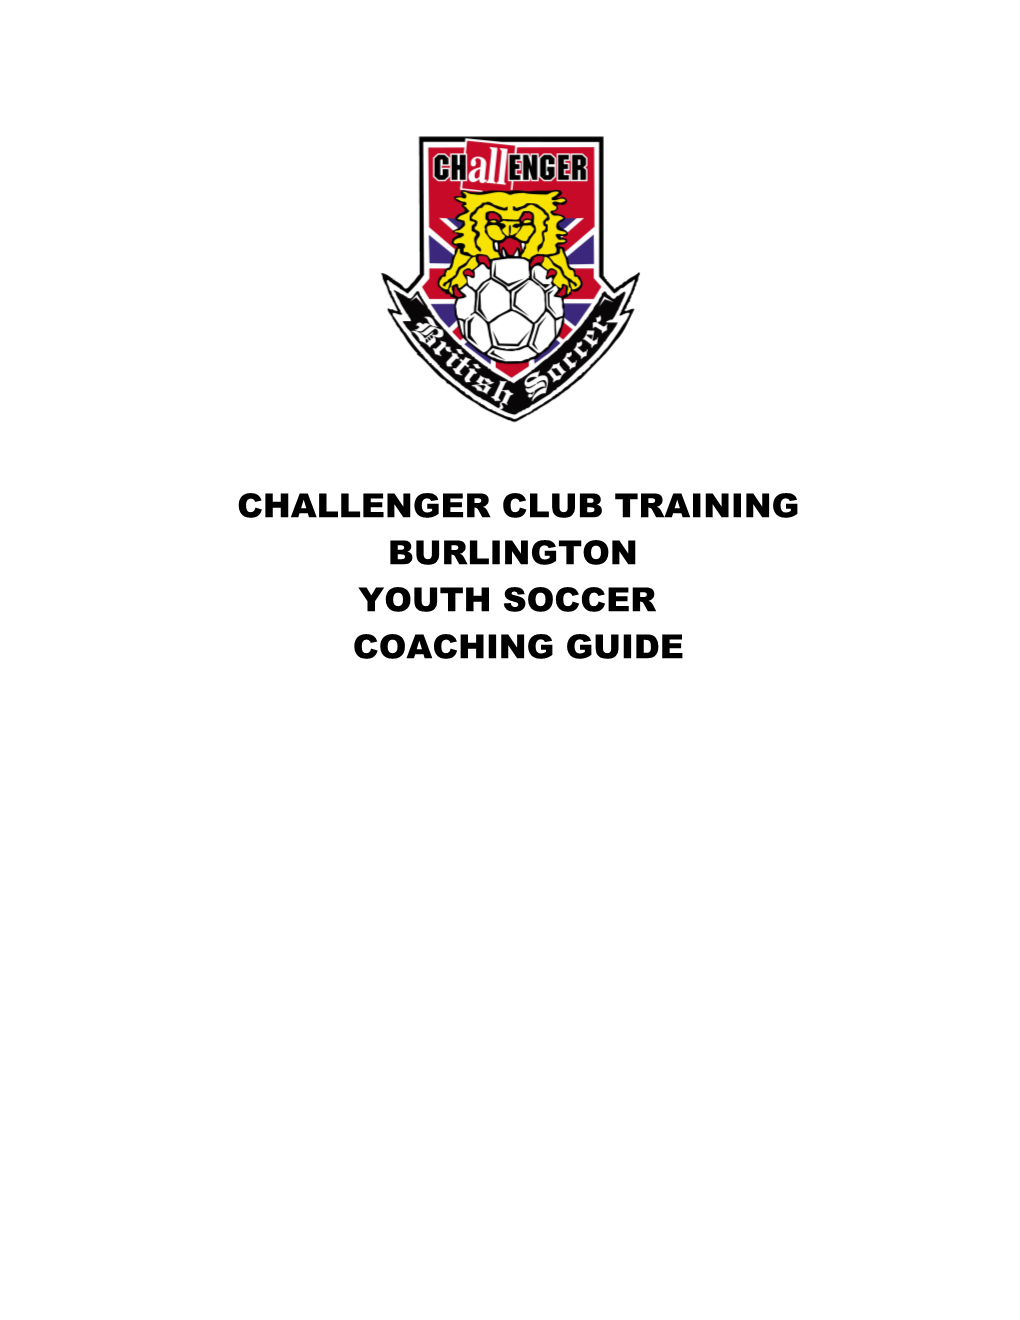 Documented in This Player Development Booklet We Will Cover the Following Areas